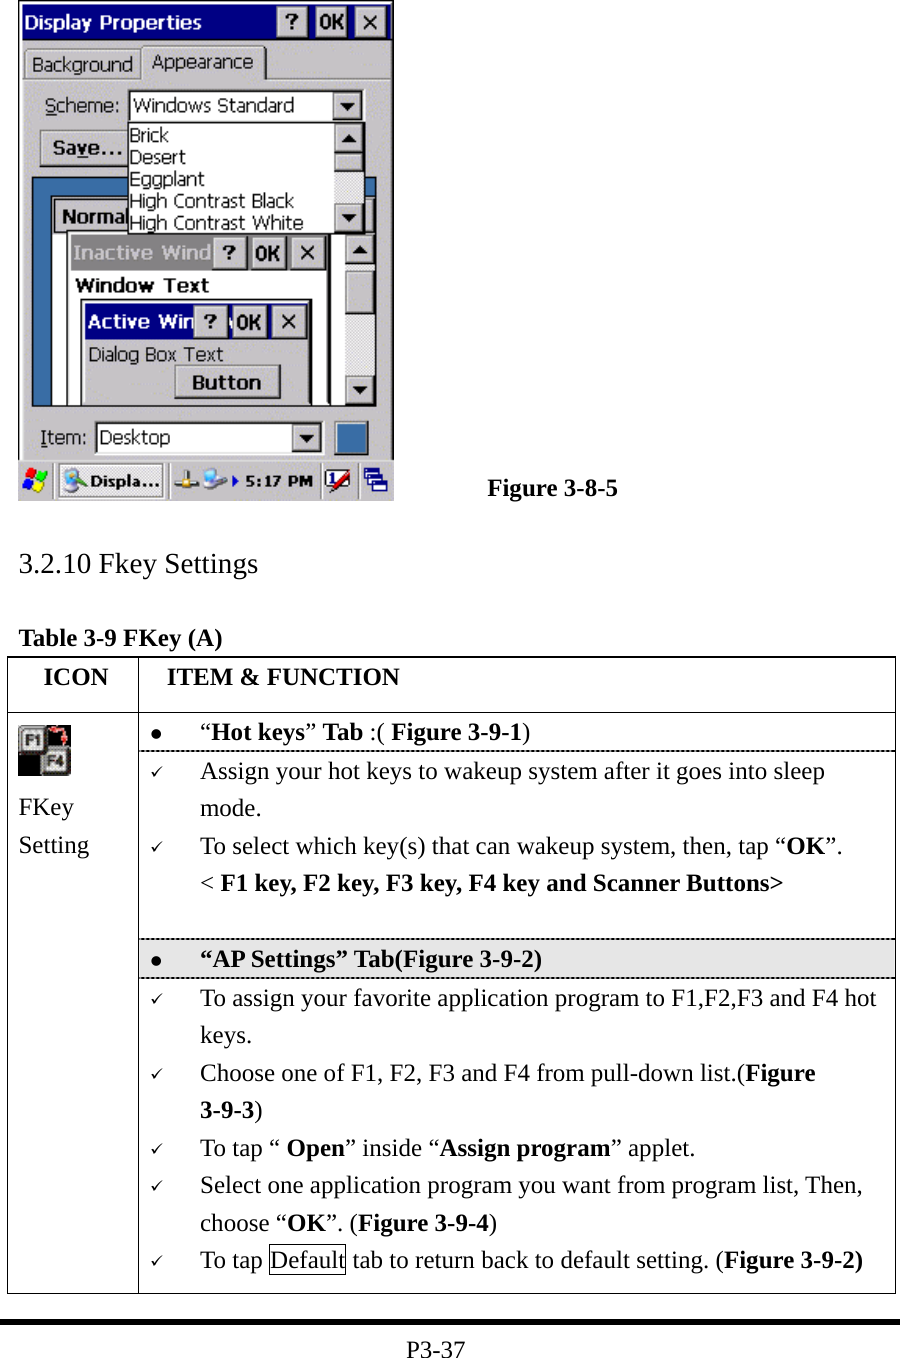                     Figure 3-8-5  3.2.10 Fkey Settings  Table 3-9 FKey (A)   ICON   ITEM &amp; FUNCTION   “Hot keys” Tab :( Figure 3-9-1)     Assign your hot keys to wakeup system after it goes into sleep mode.   To select which key(s) that can wakeup system, then, tap “OK”. &lt; F1 key, F2 key, F3 key, F4 key and Scanner Buttons&gt;     “AP Settings” Tab(Figure 3-9-2)  FKey Setting    To assign your favorite application program to F1,F2,F3 and F4 hot keys.   Choose one of F1, F2, F3 and F4 from pull-down list.(Figure 3-9-3)   To tap “ Open” inside “Assign program” applet.     Select one application program you want from program list, Then, choose “OK”. (Figure 3-9-4)   To tap Default tab to return back to default setting. (Figure 3-9-2)  P3-37 